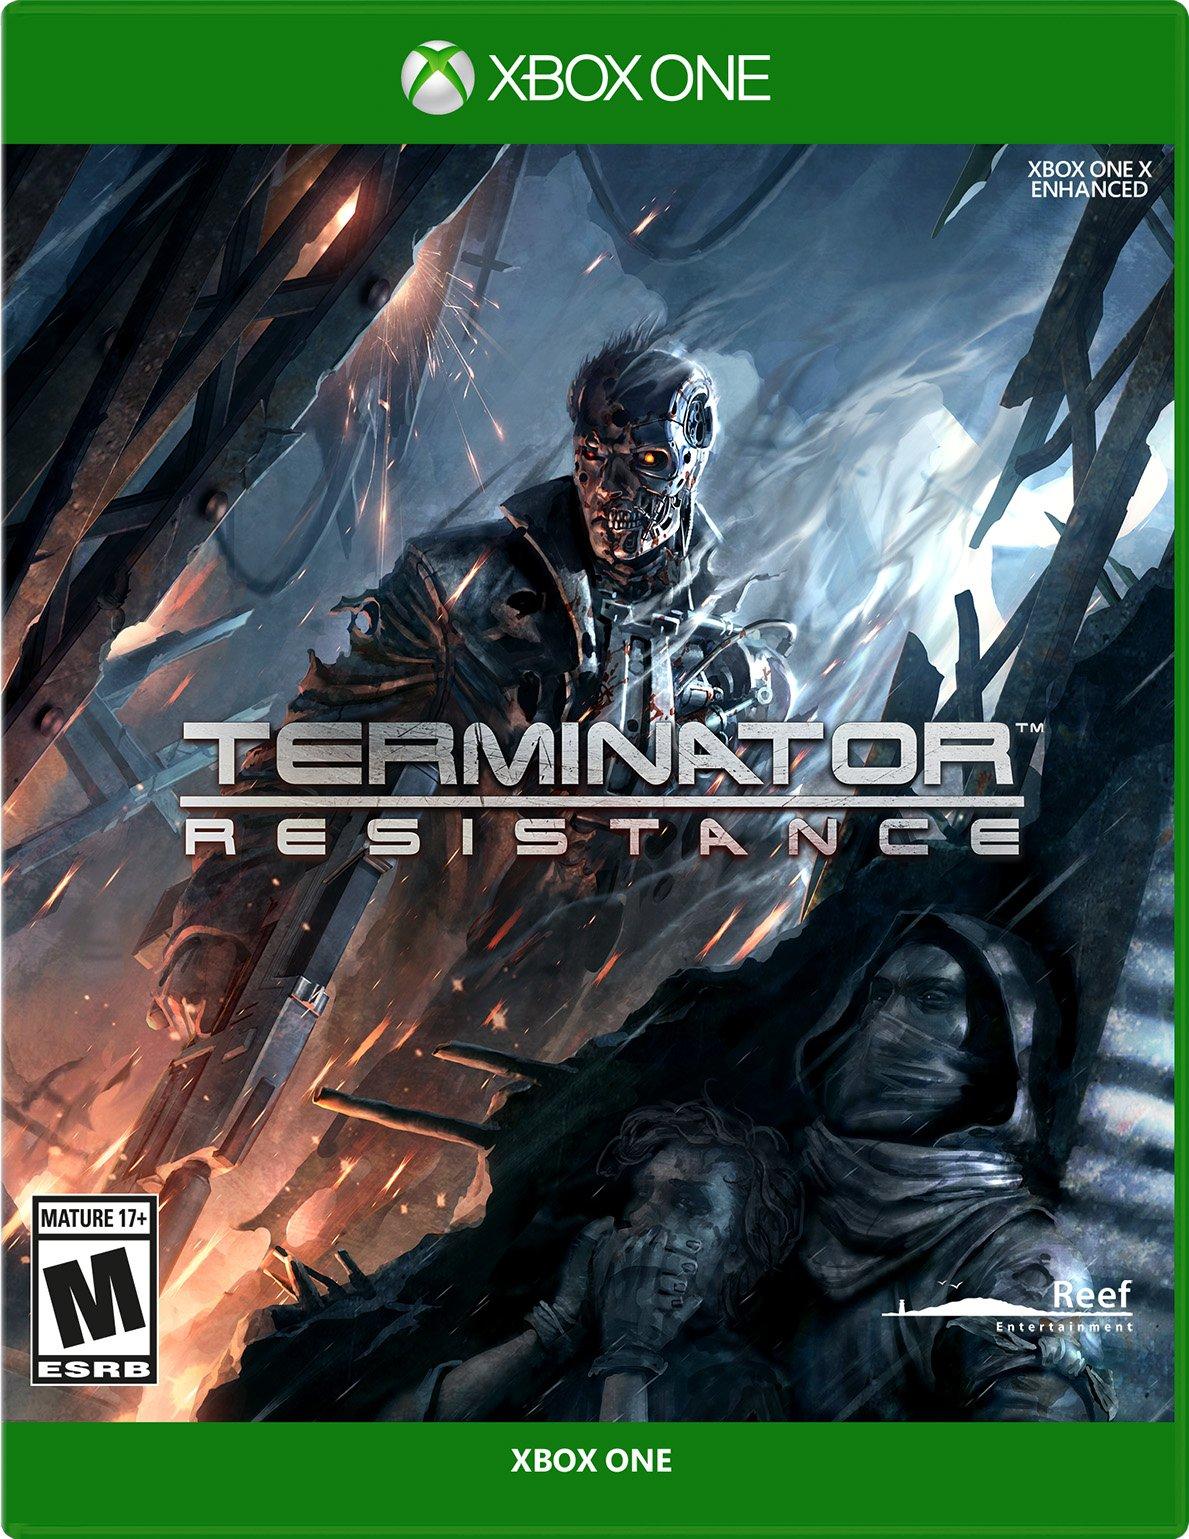 Terminator: Resistance Complete Edition - Official Xbox Series X/S